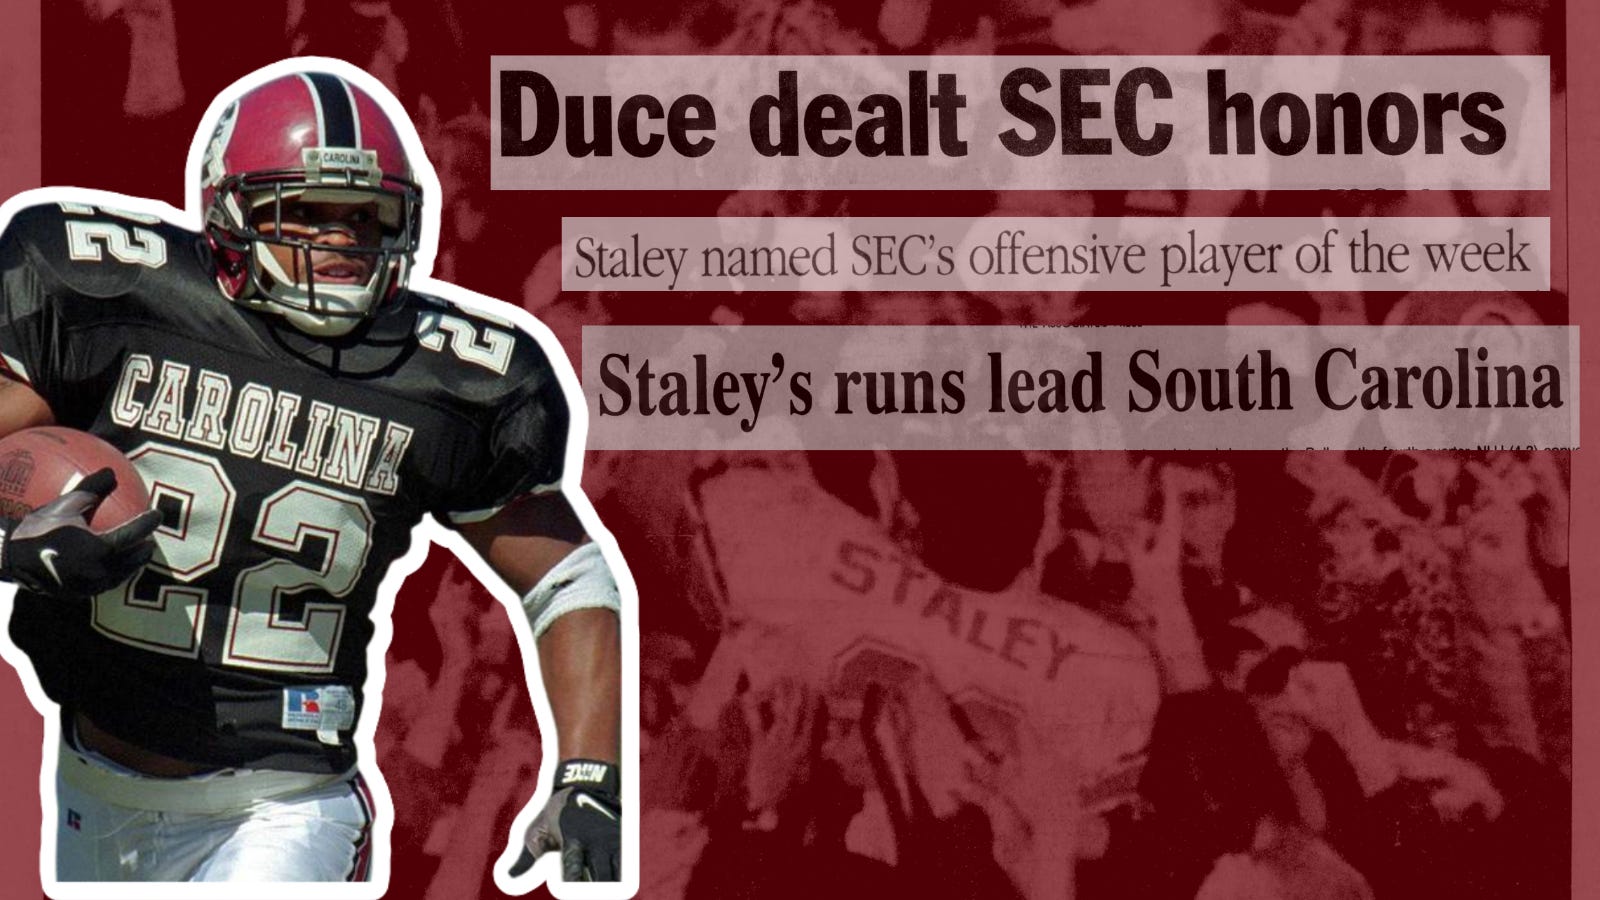 Is Dawn Staley Related to Duce Staley? Here's the Truth